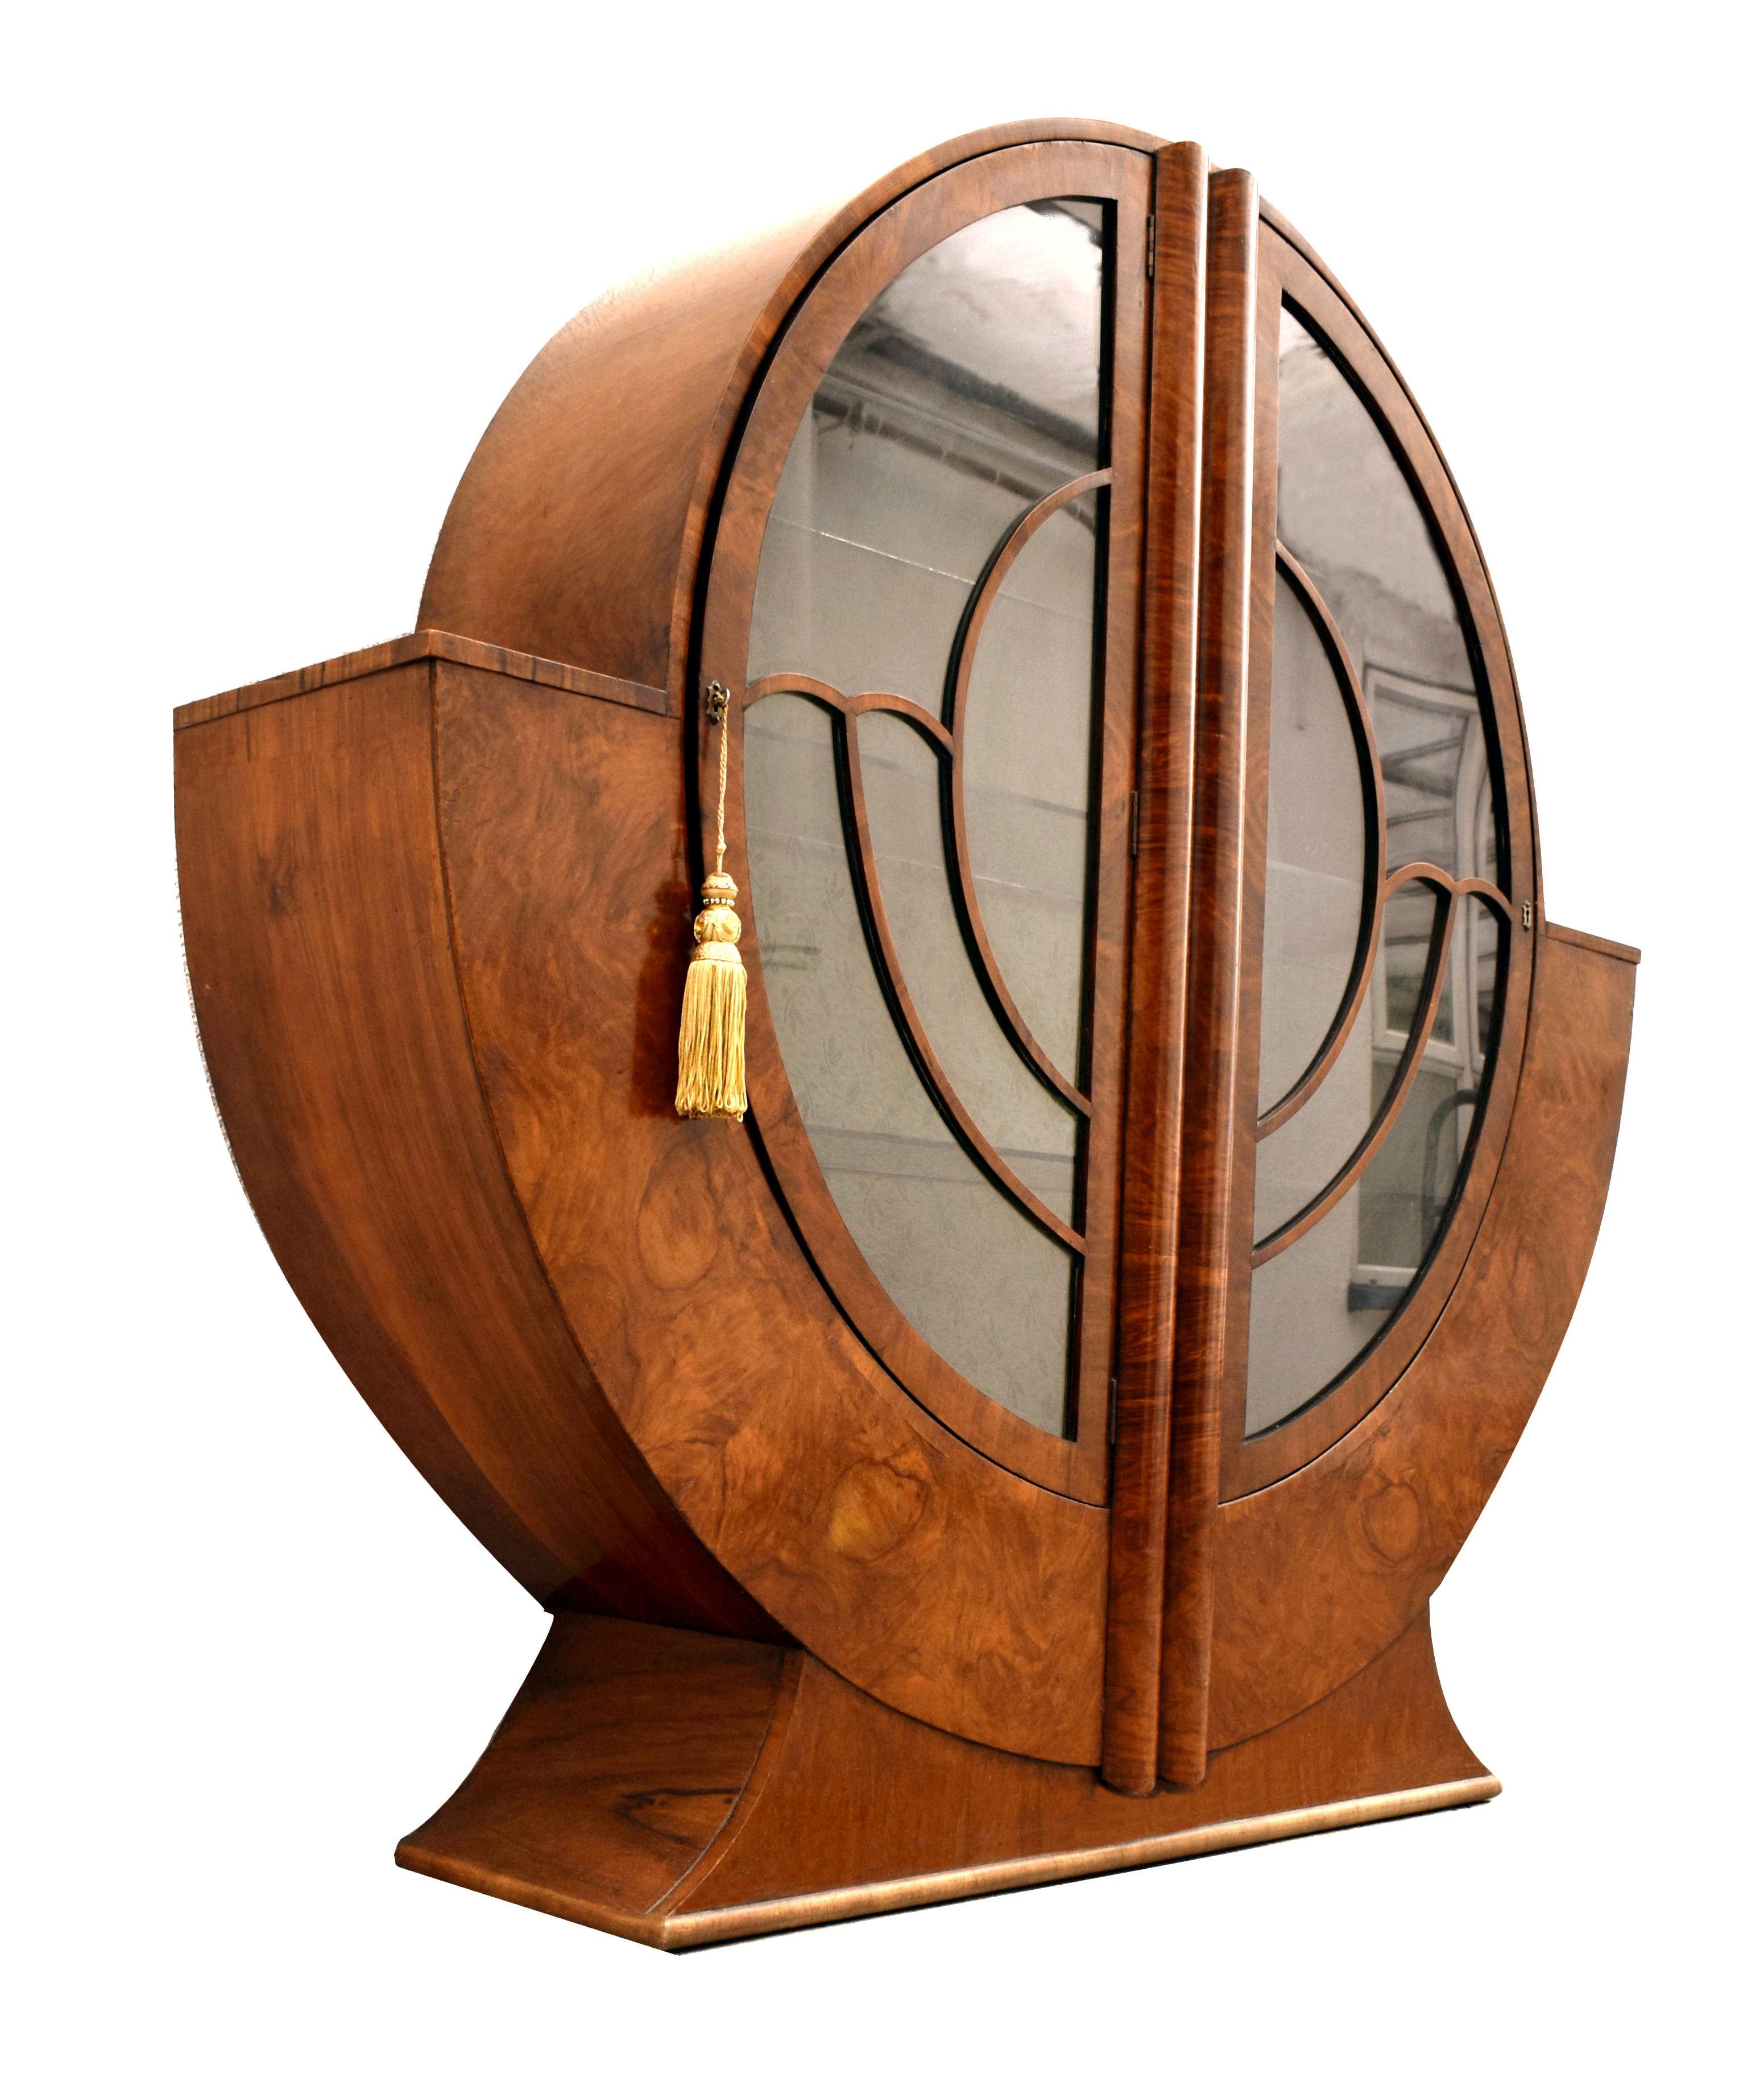 Impressively stylish and genuinely rare design is this superb 1930's English Art Deco Display cabinet. This beautiful cabinet is veneered in beautifully figured walnut veneer which has the most glorious patterning to the grain and retains a warm